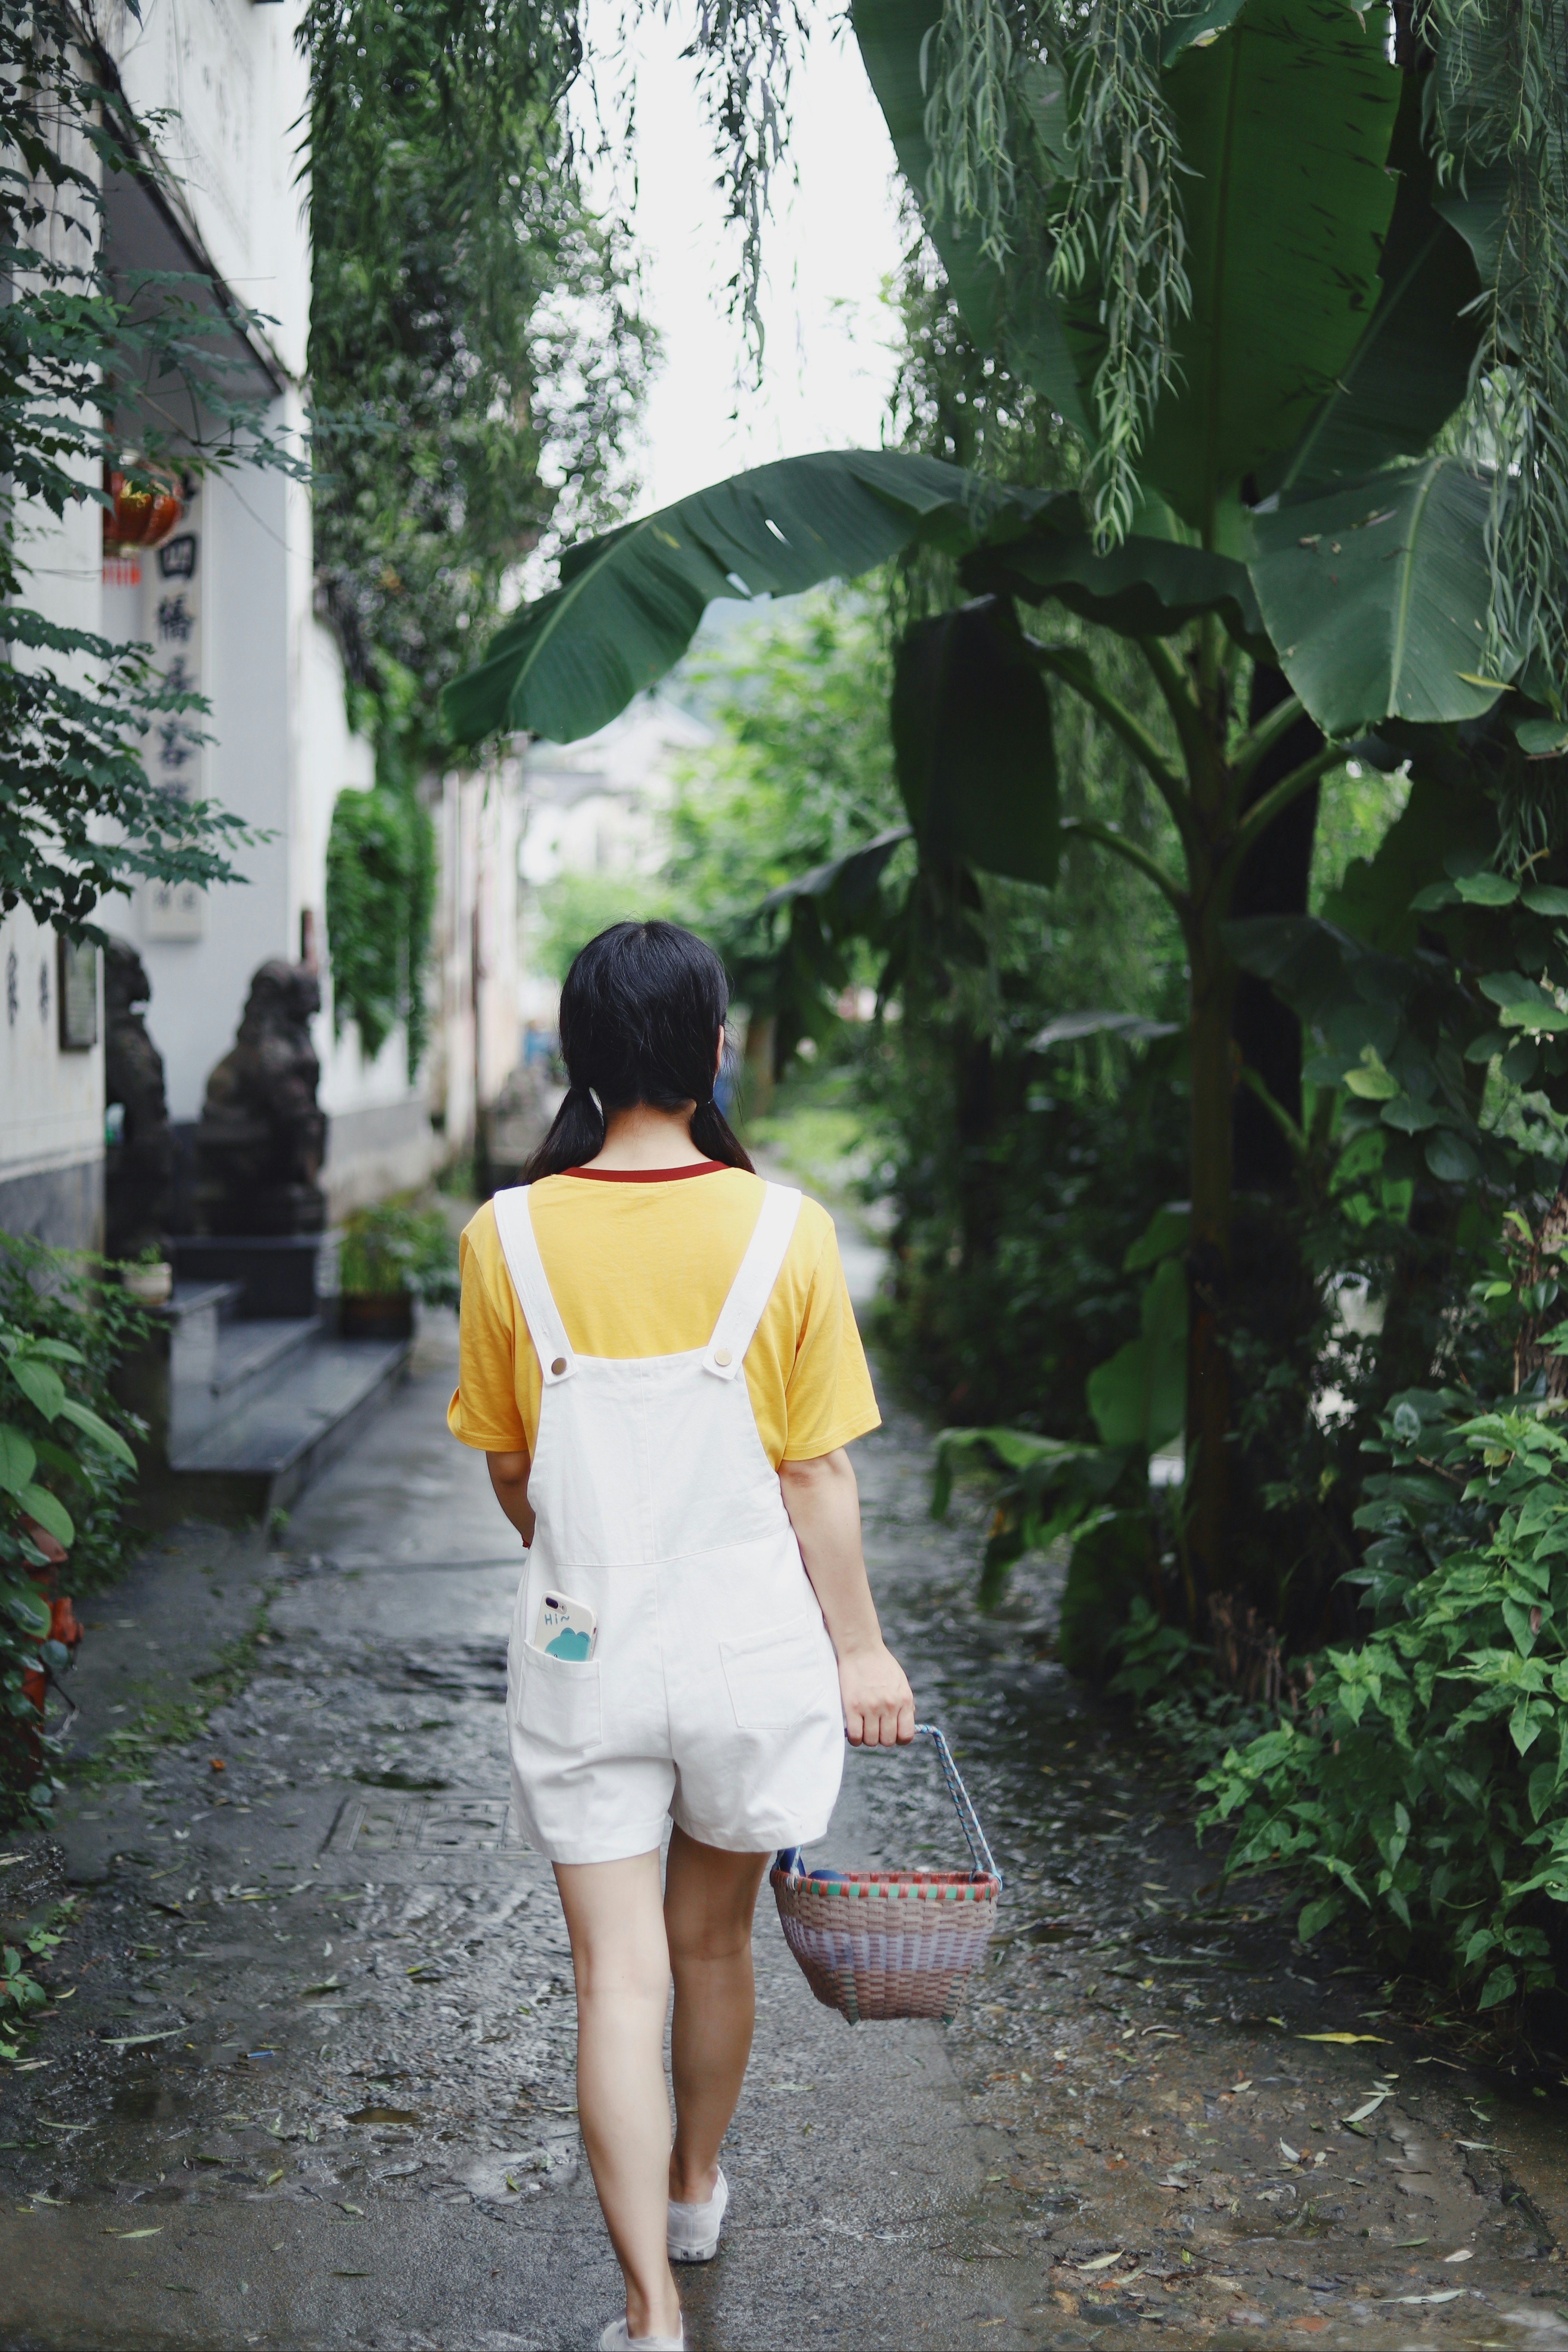 woman in white and yellow shirt walking on pathway